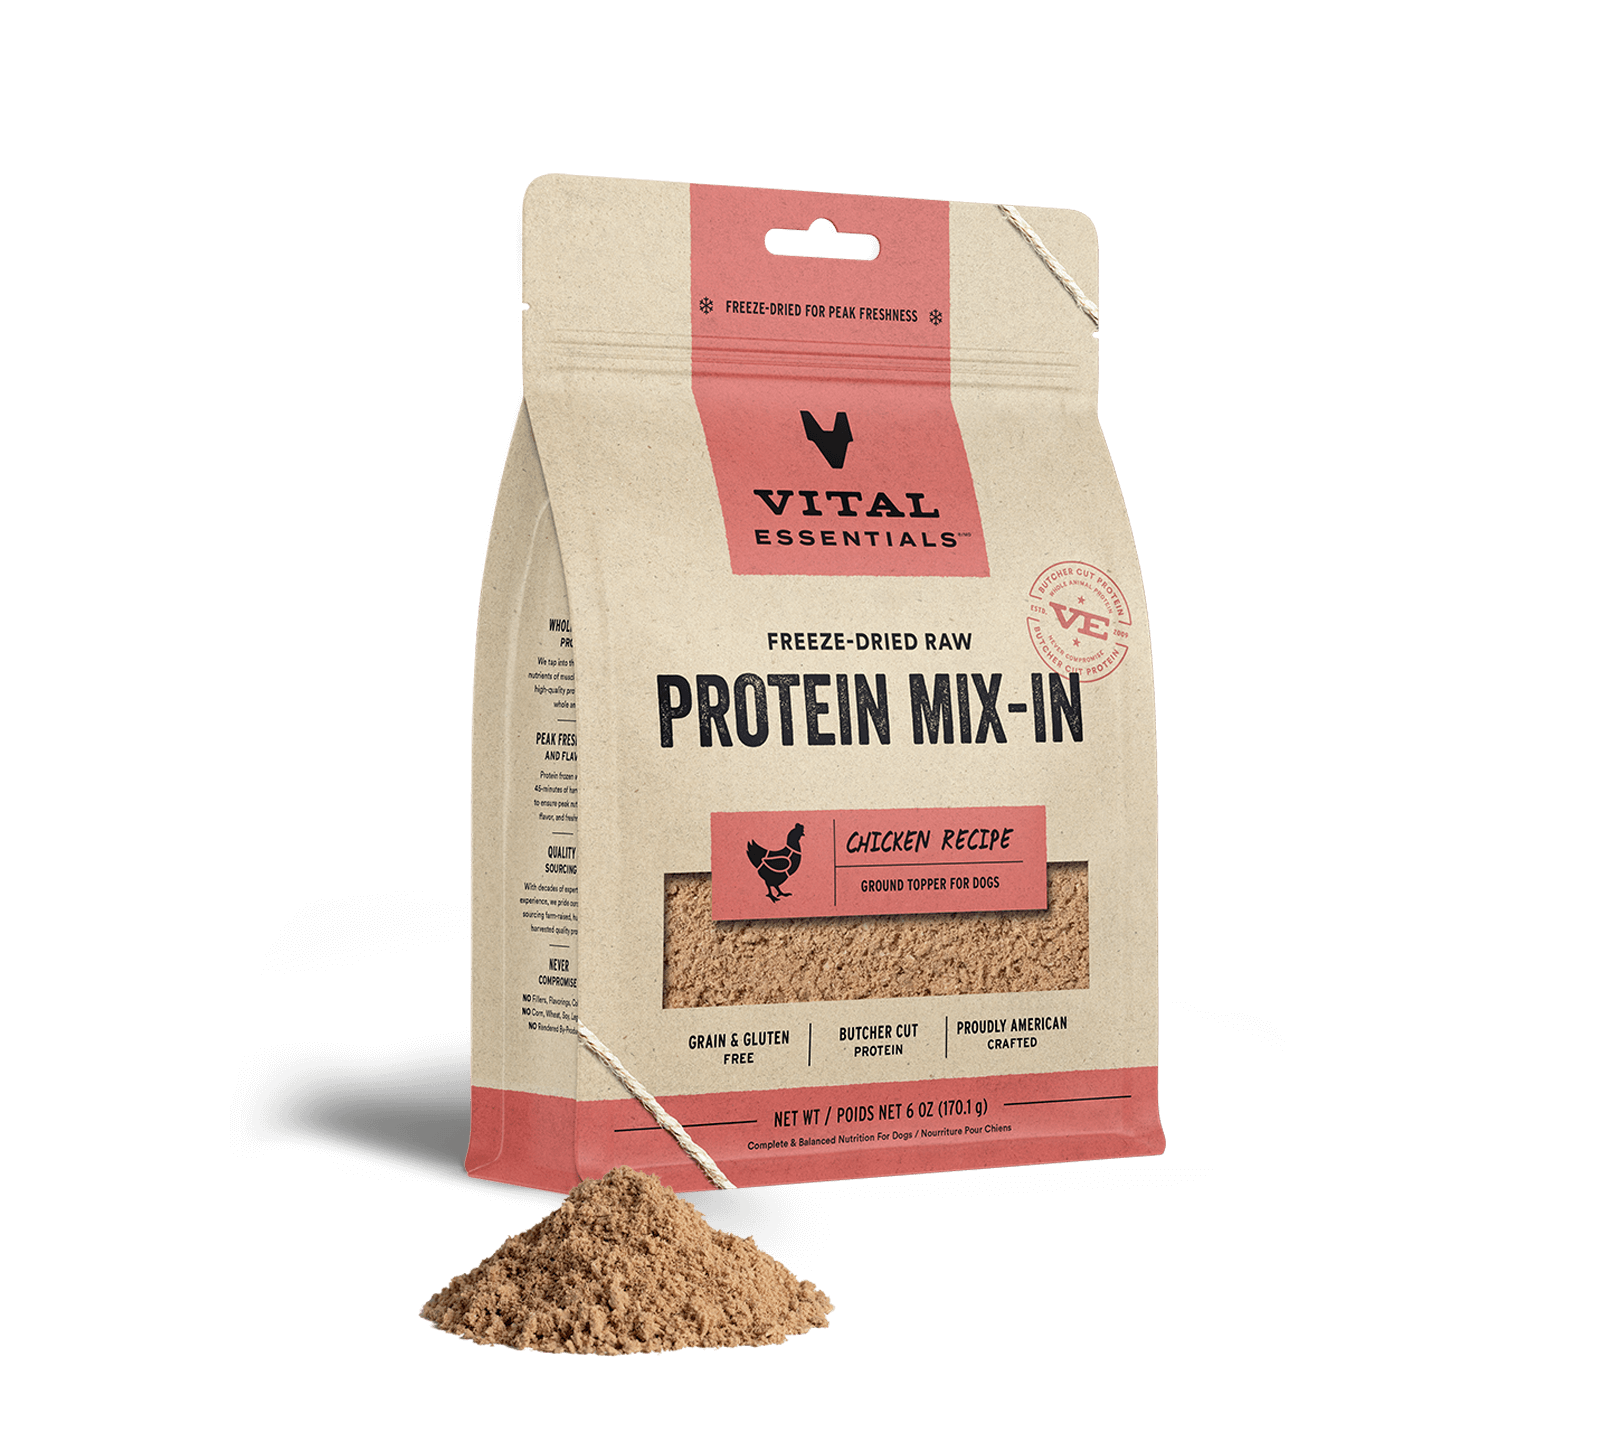 Vital Essentials Freeze-Dried Raw Protein Mix-In Chicken Recipe Ground Topper for Dogs, 6 oz - Treats